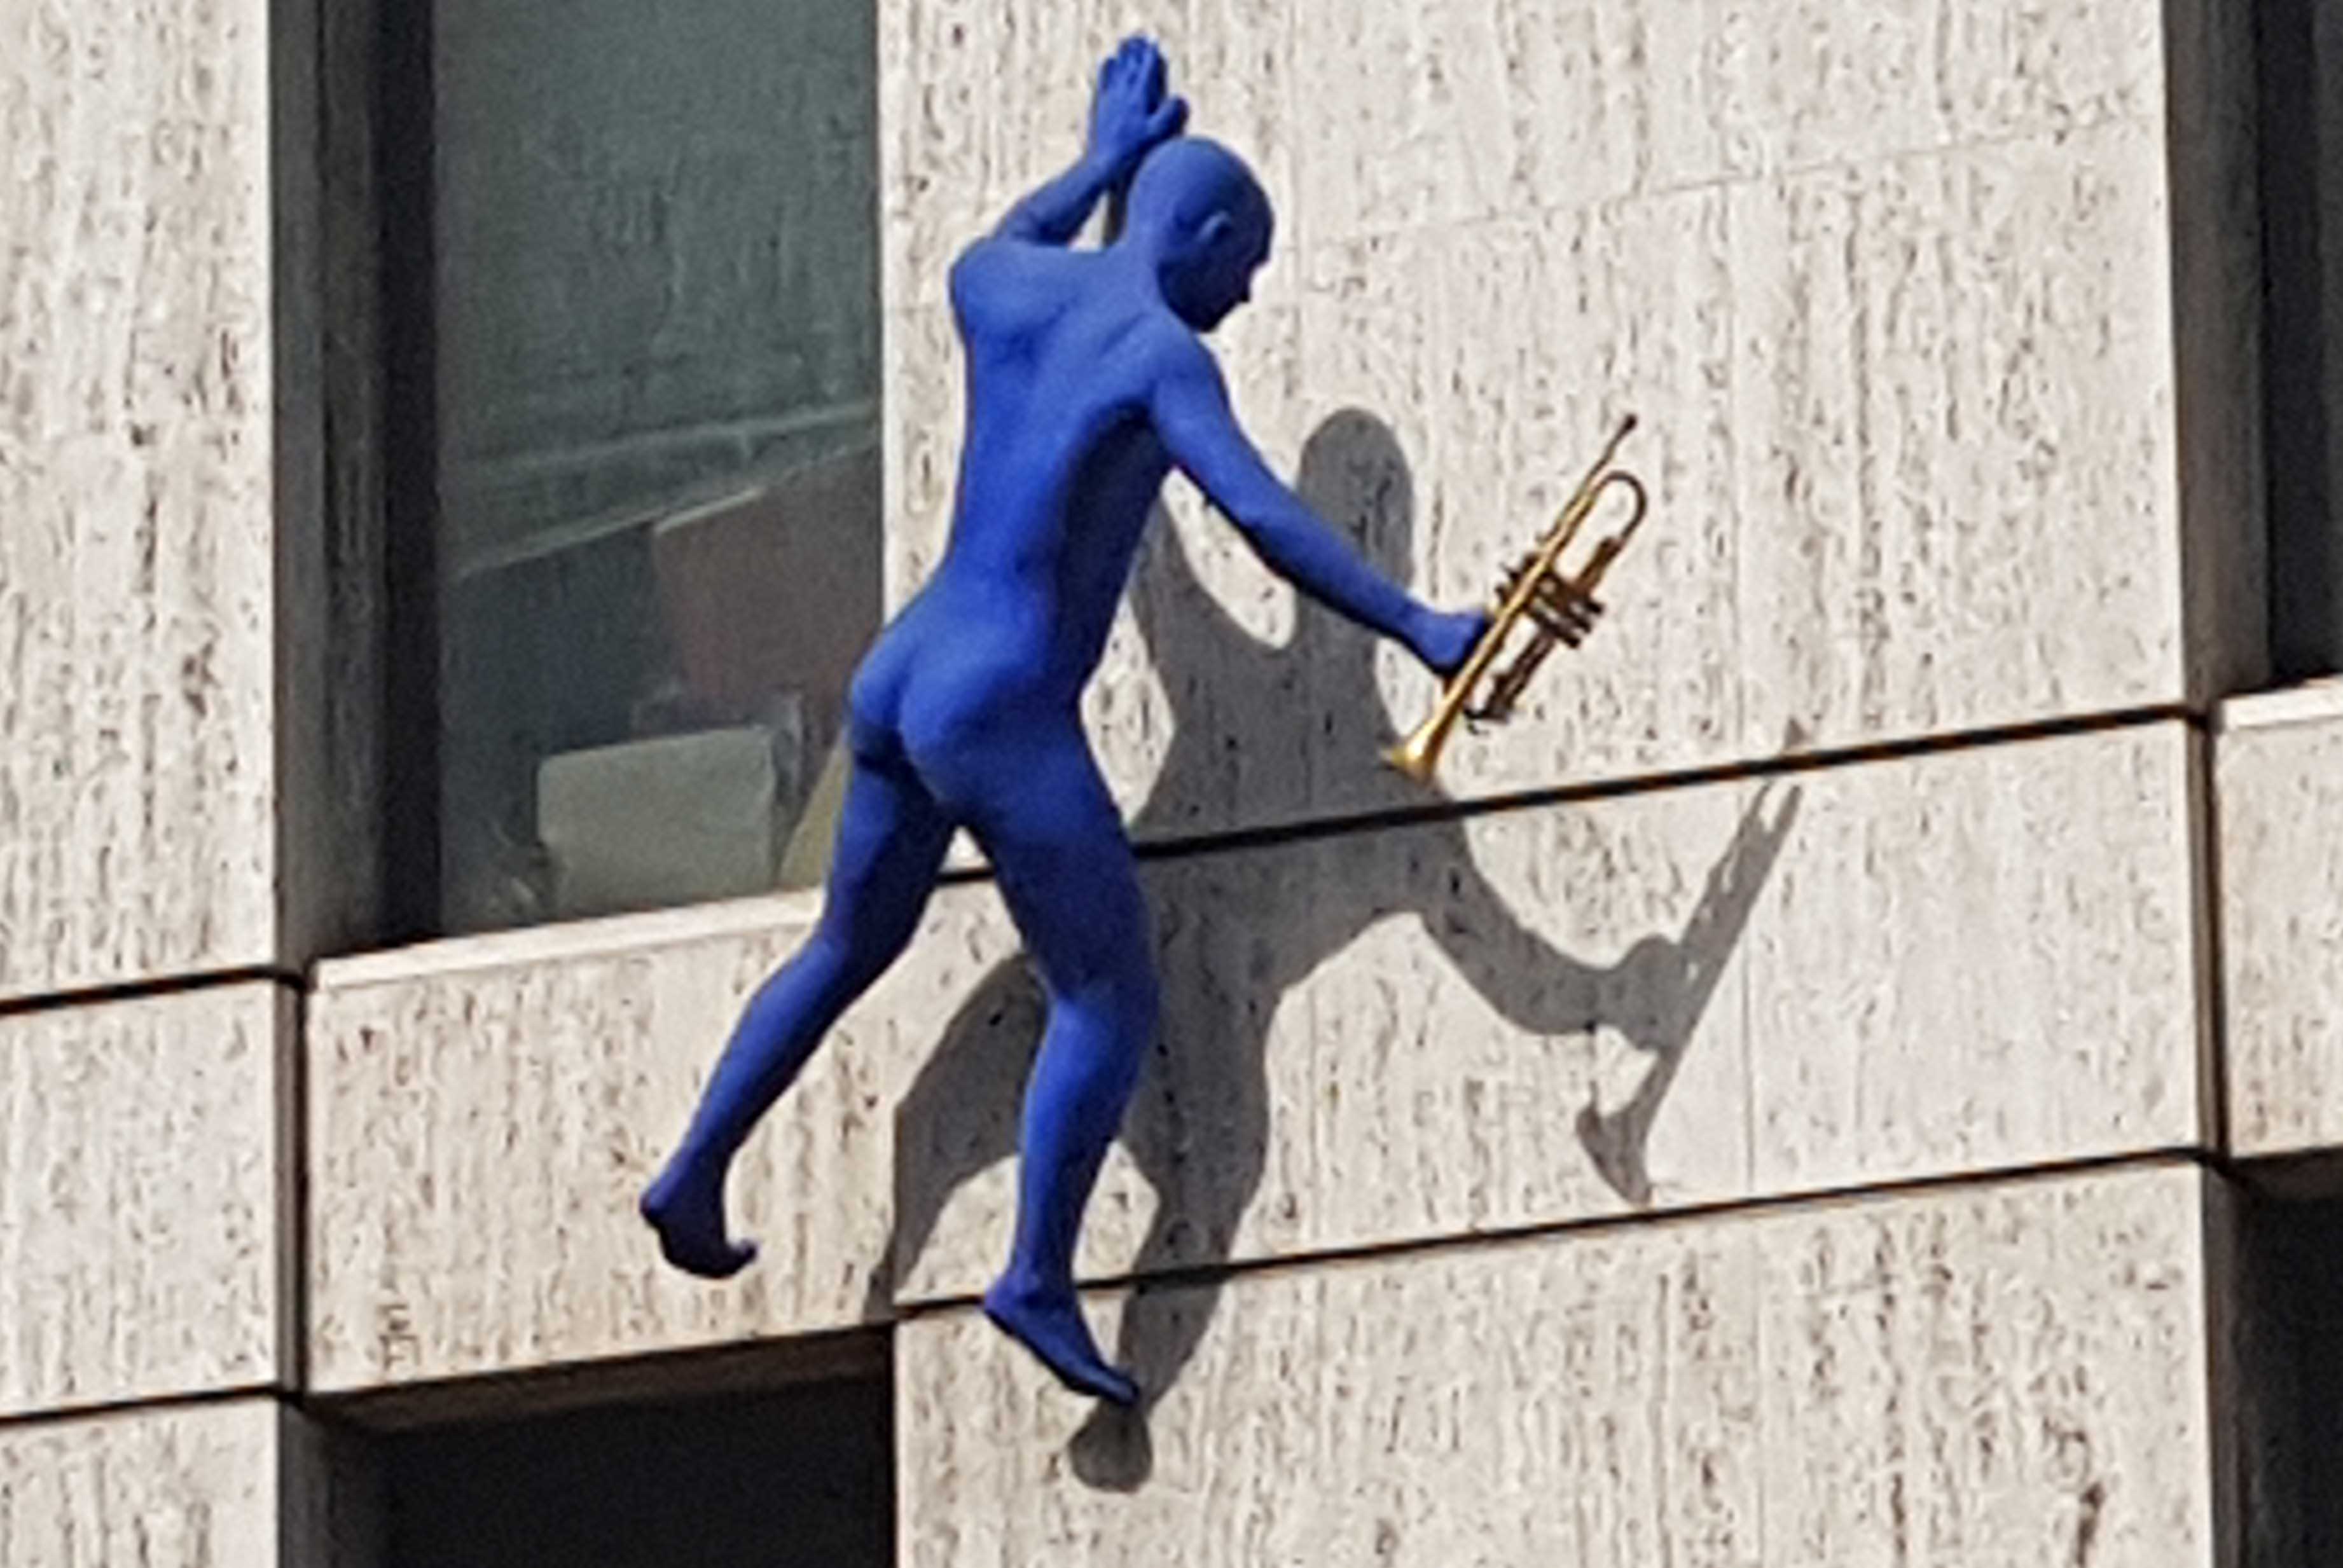 One of the blue figures climbing up the wall of Maya House.